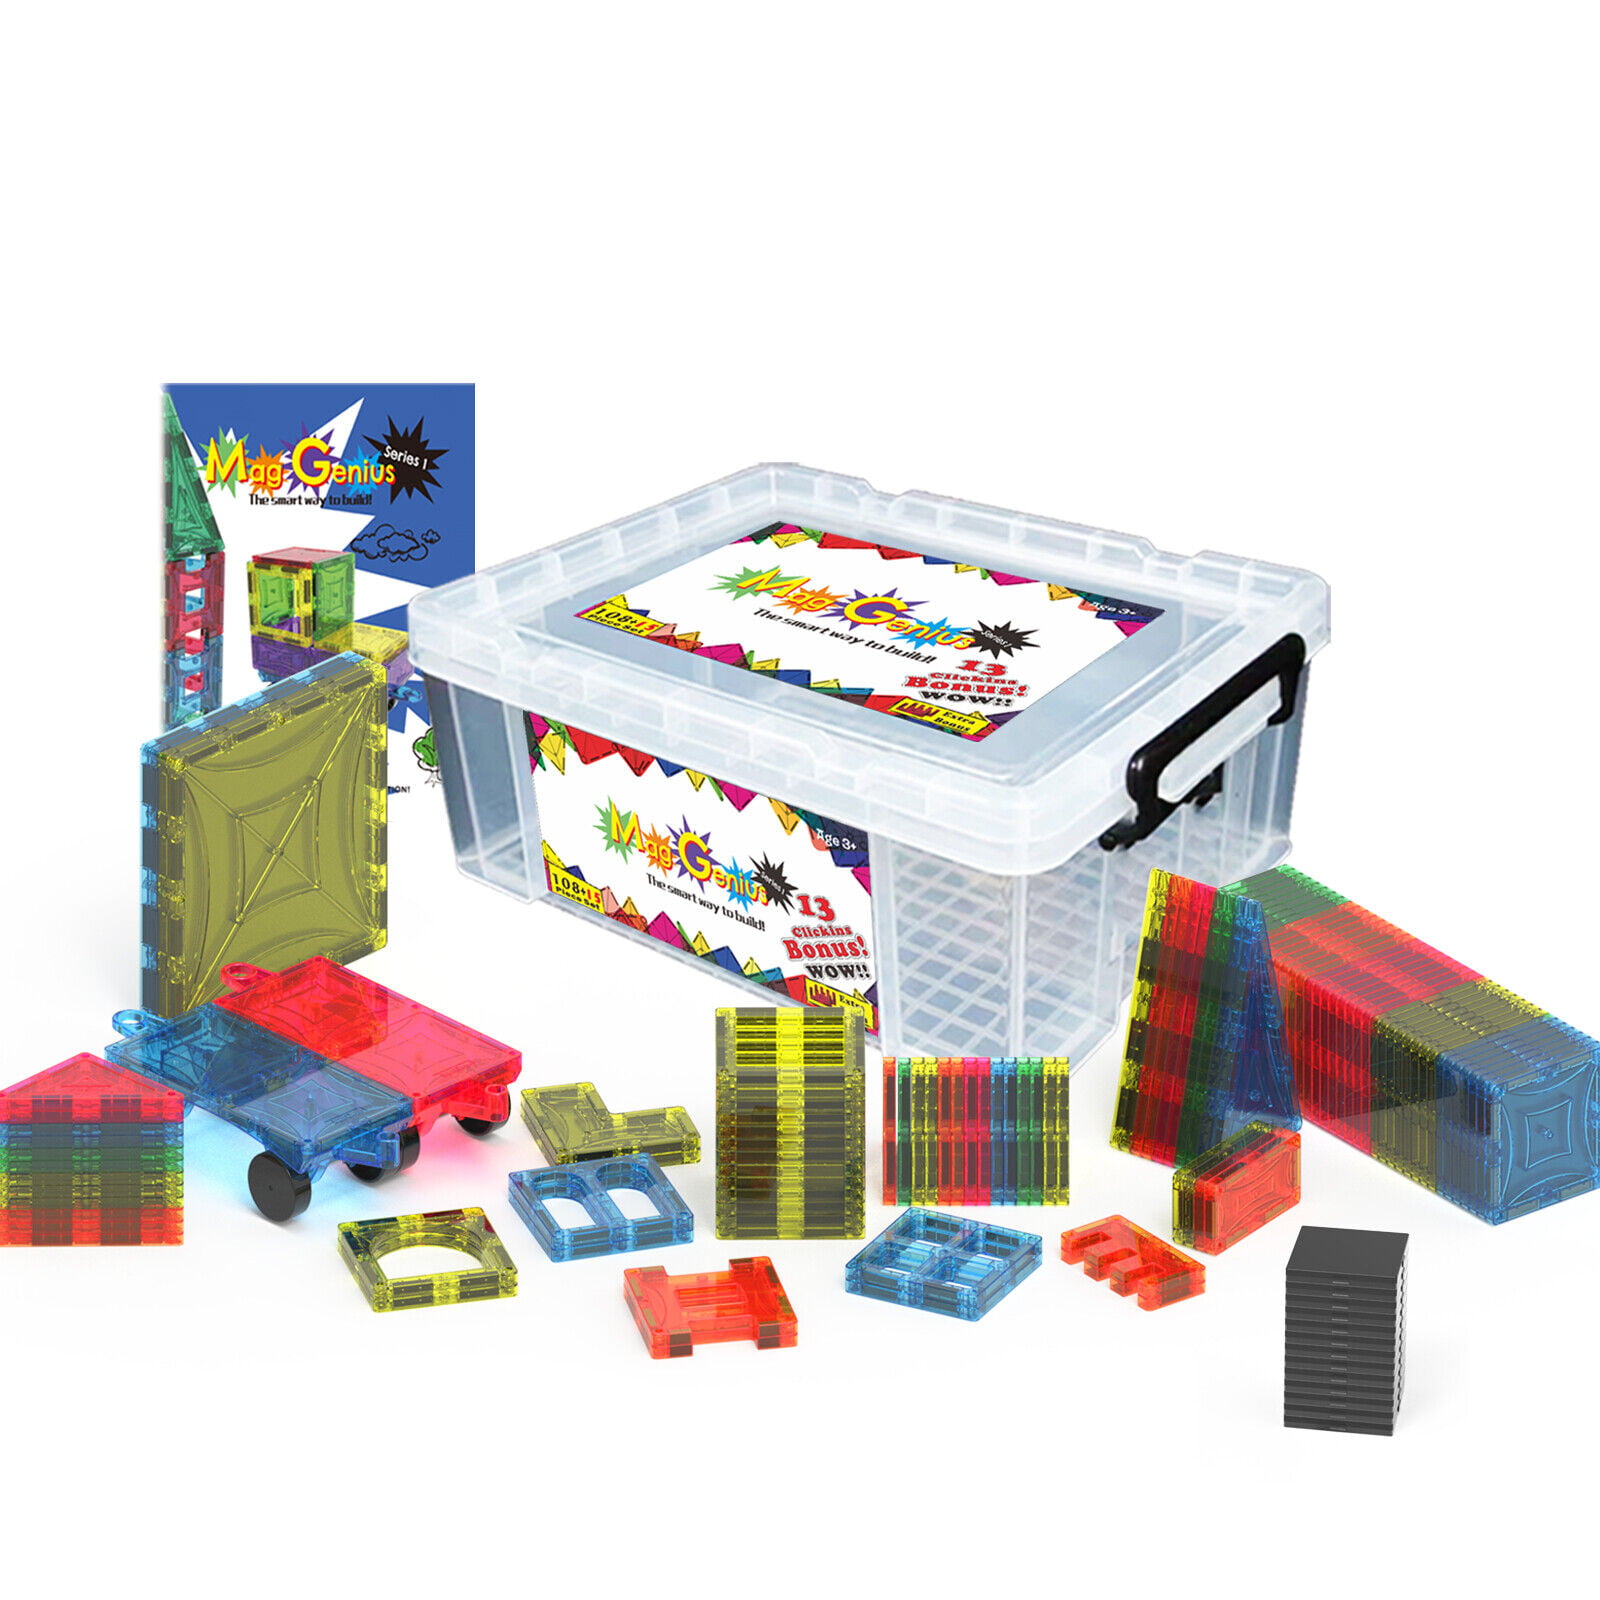 Mag-Genius building Tiles Magnet Toy Blocks Clear Colors 3D Brain Building  Blocks Set of 185 + Piece Includes 2 Cars And Free Storage Bin